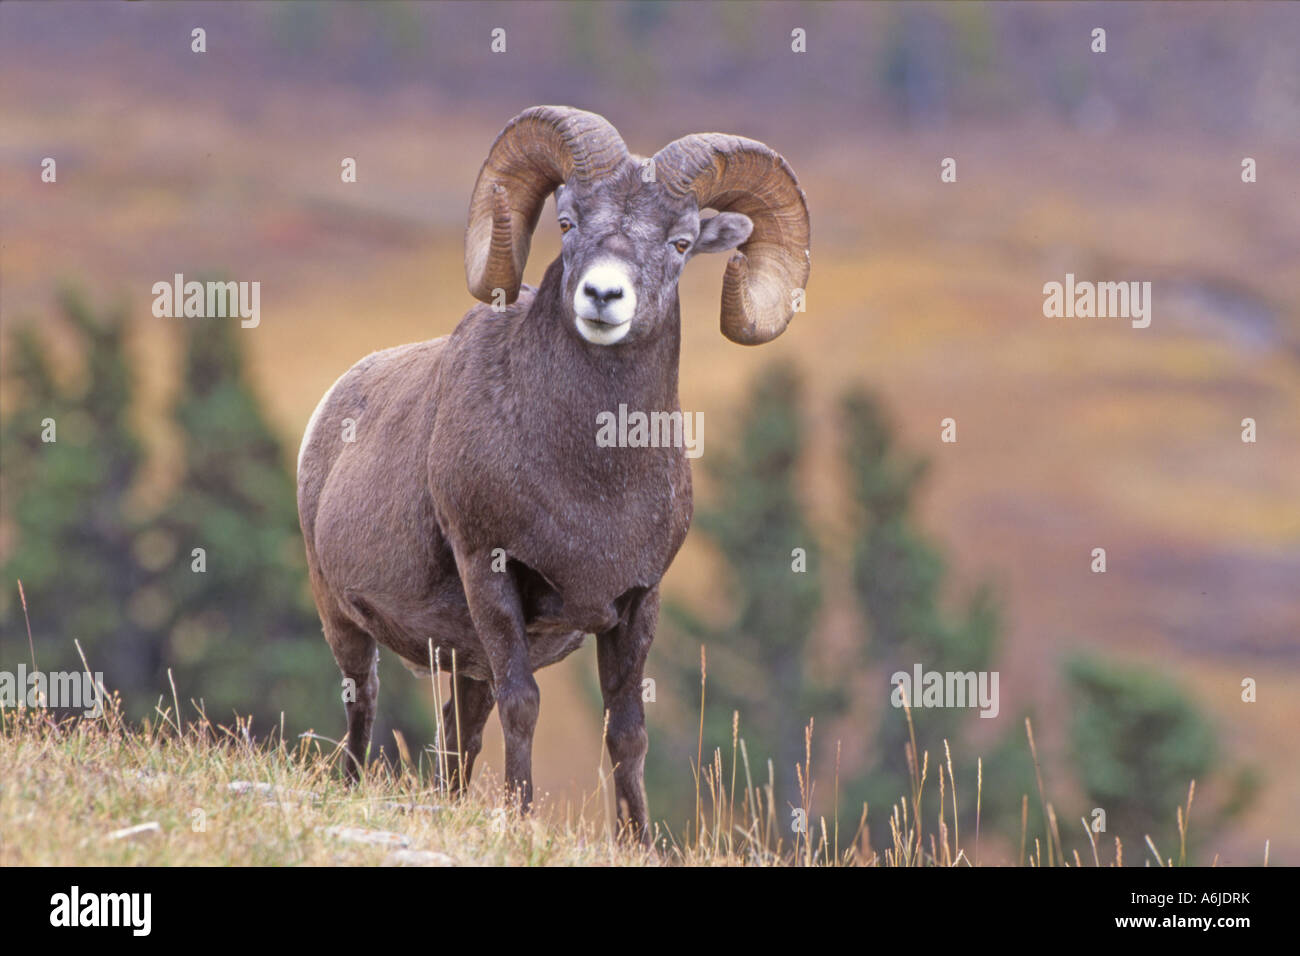 Bighorn Sheep, American Bighorn, Mountain Sheep (Ovis canadensis), male (ram) standing on slope Stock Photo